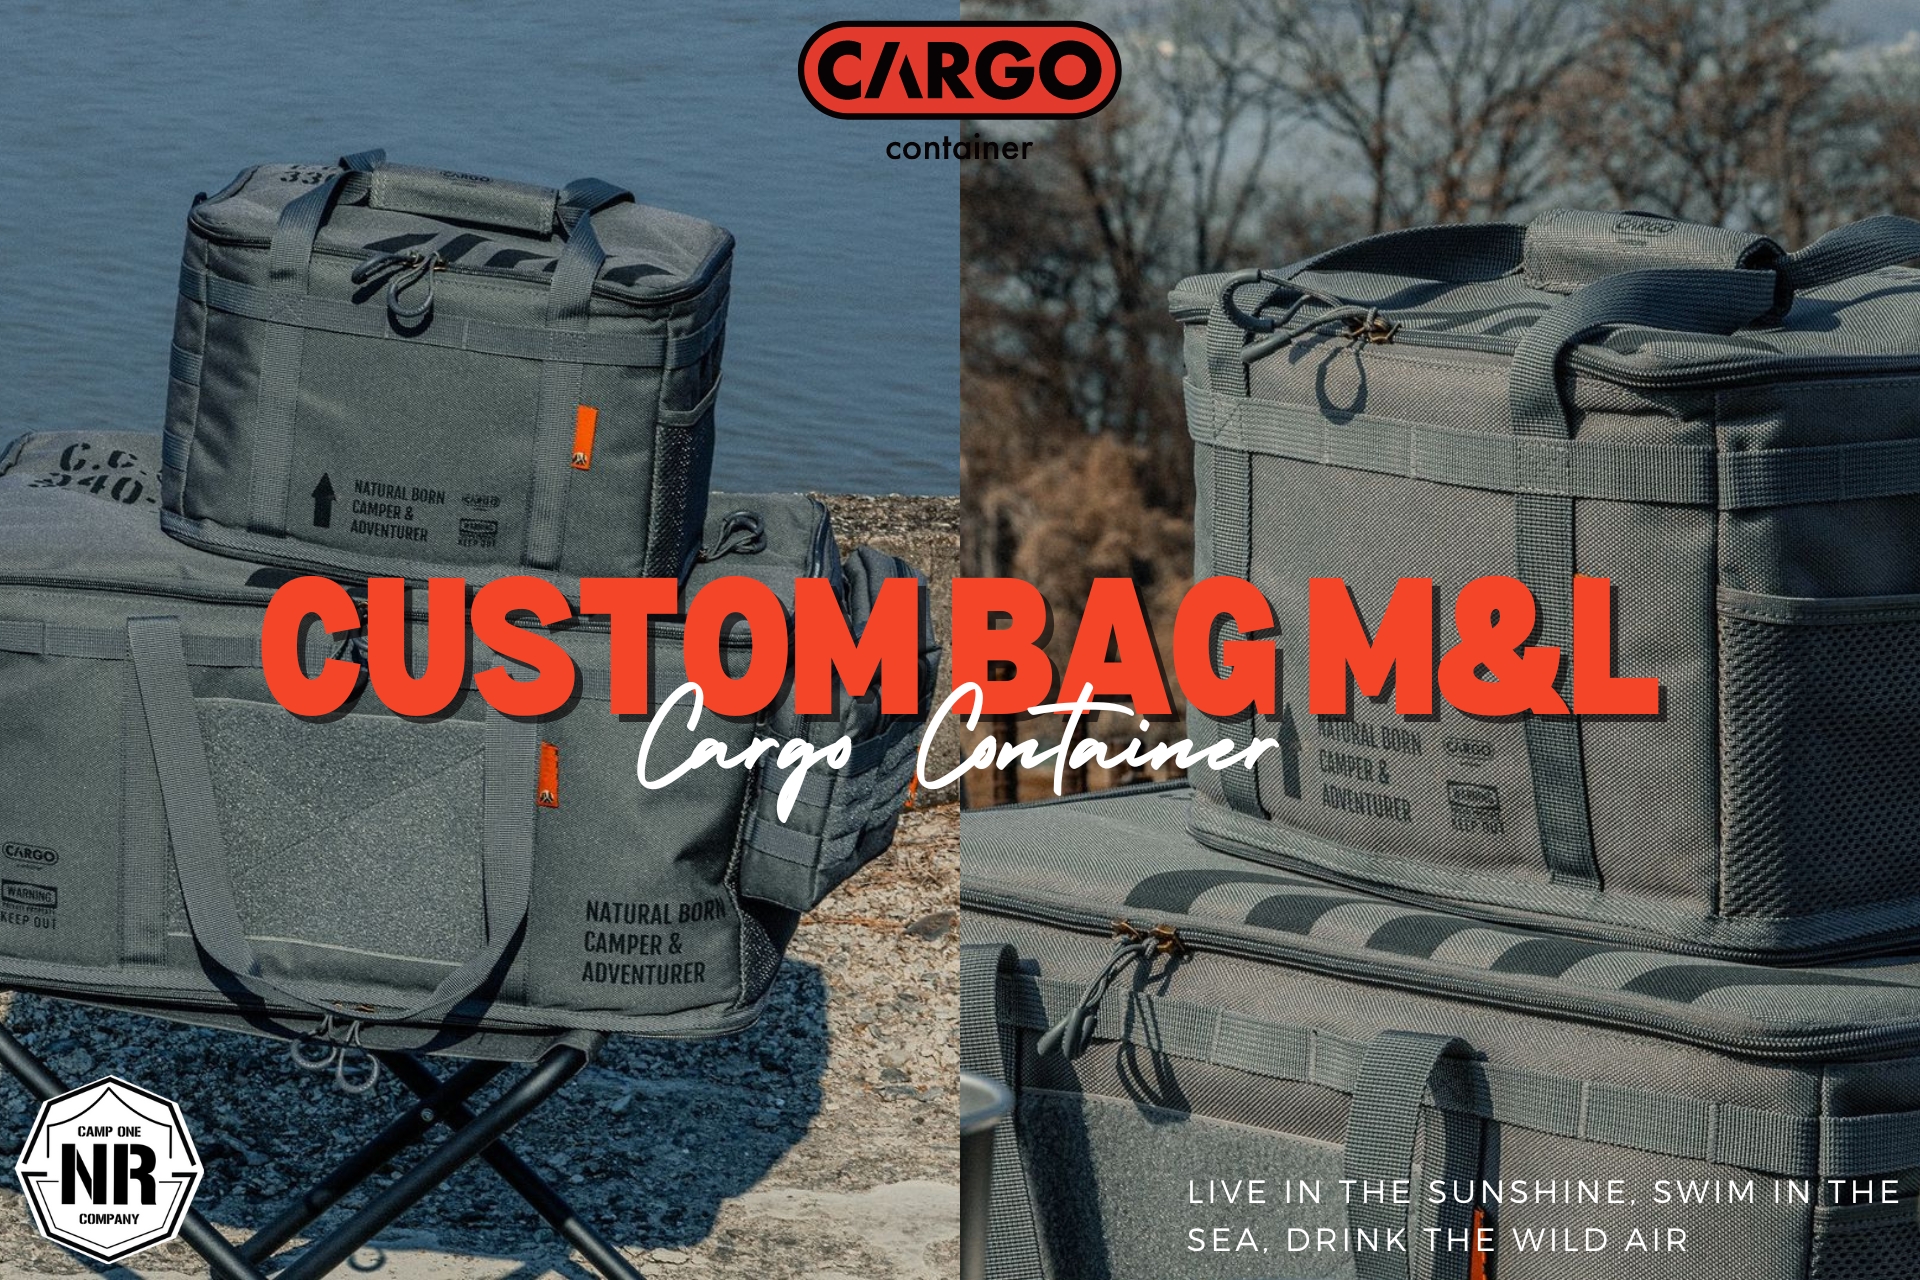 CUSTOM BAG BY CARGO CONTAINER